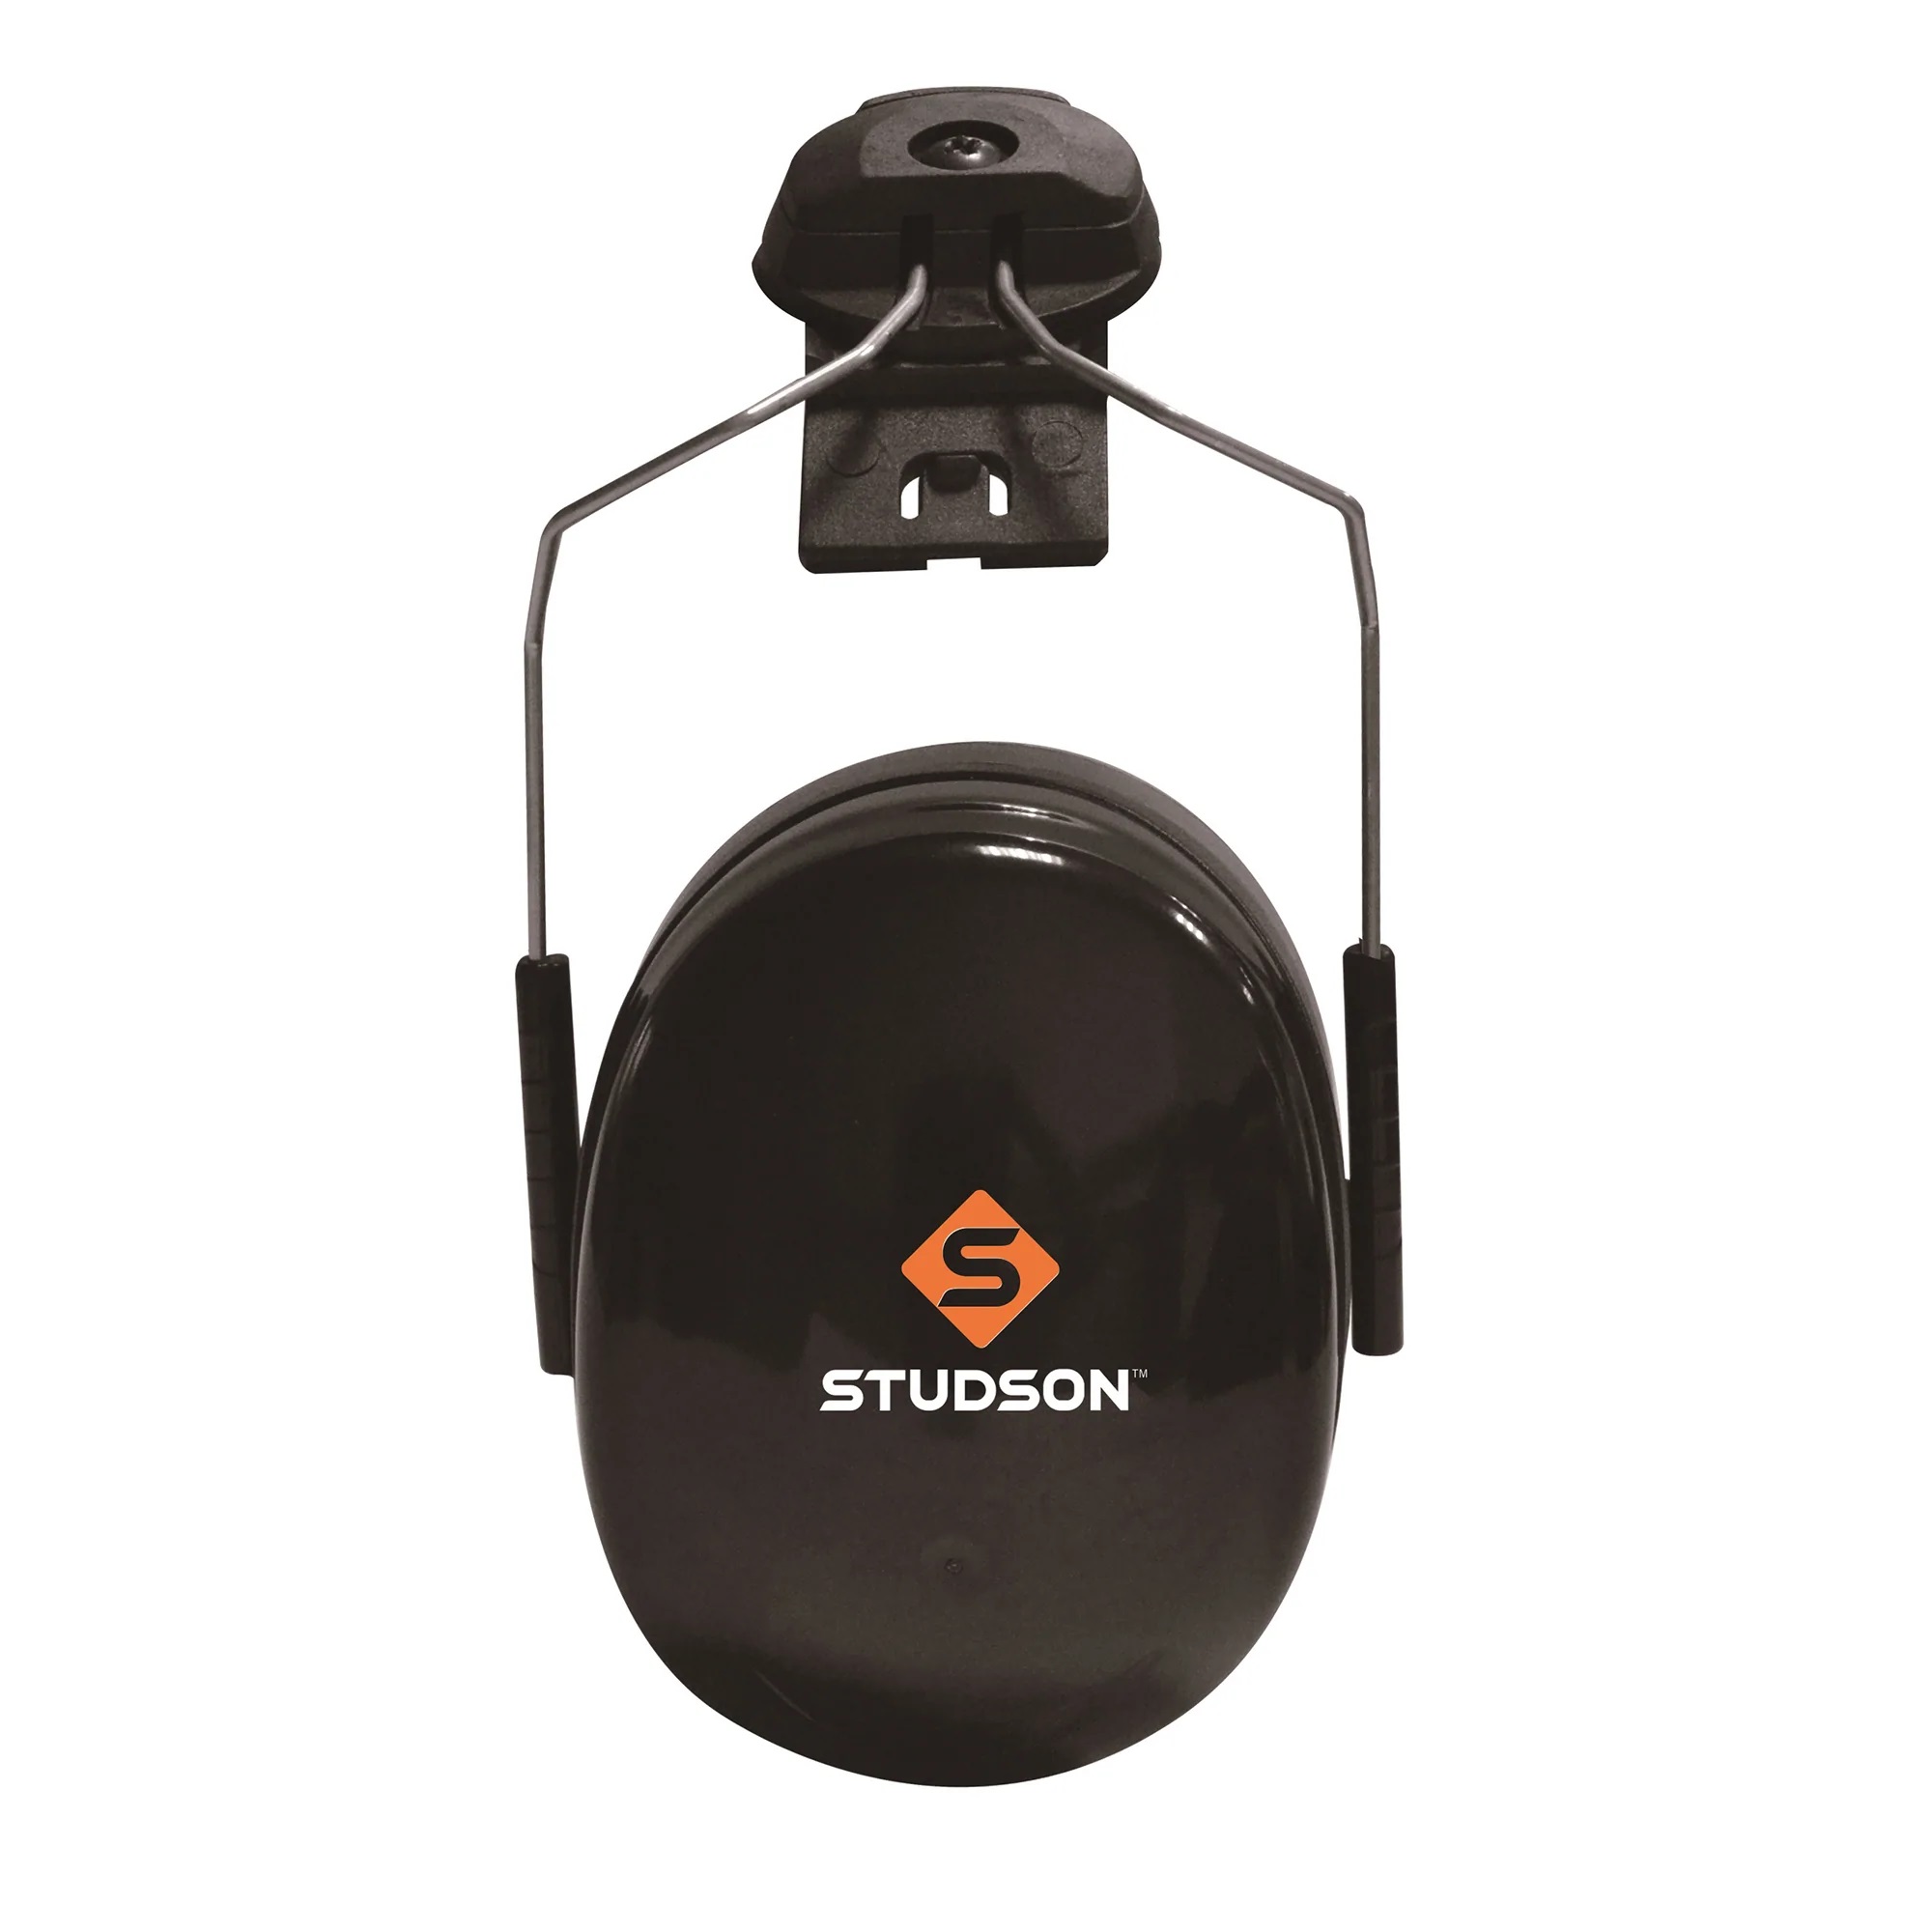 Studson Ear Defender Ear Muffs from Columbia Safety